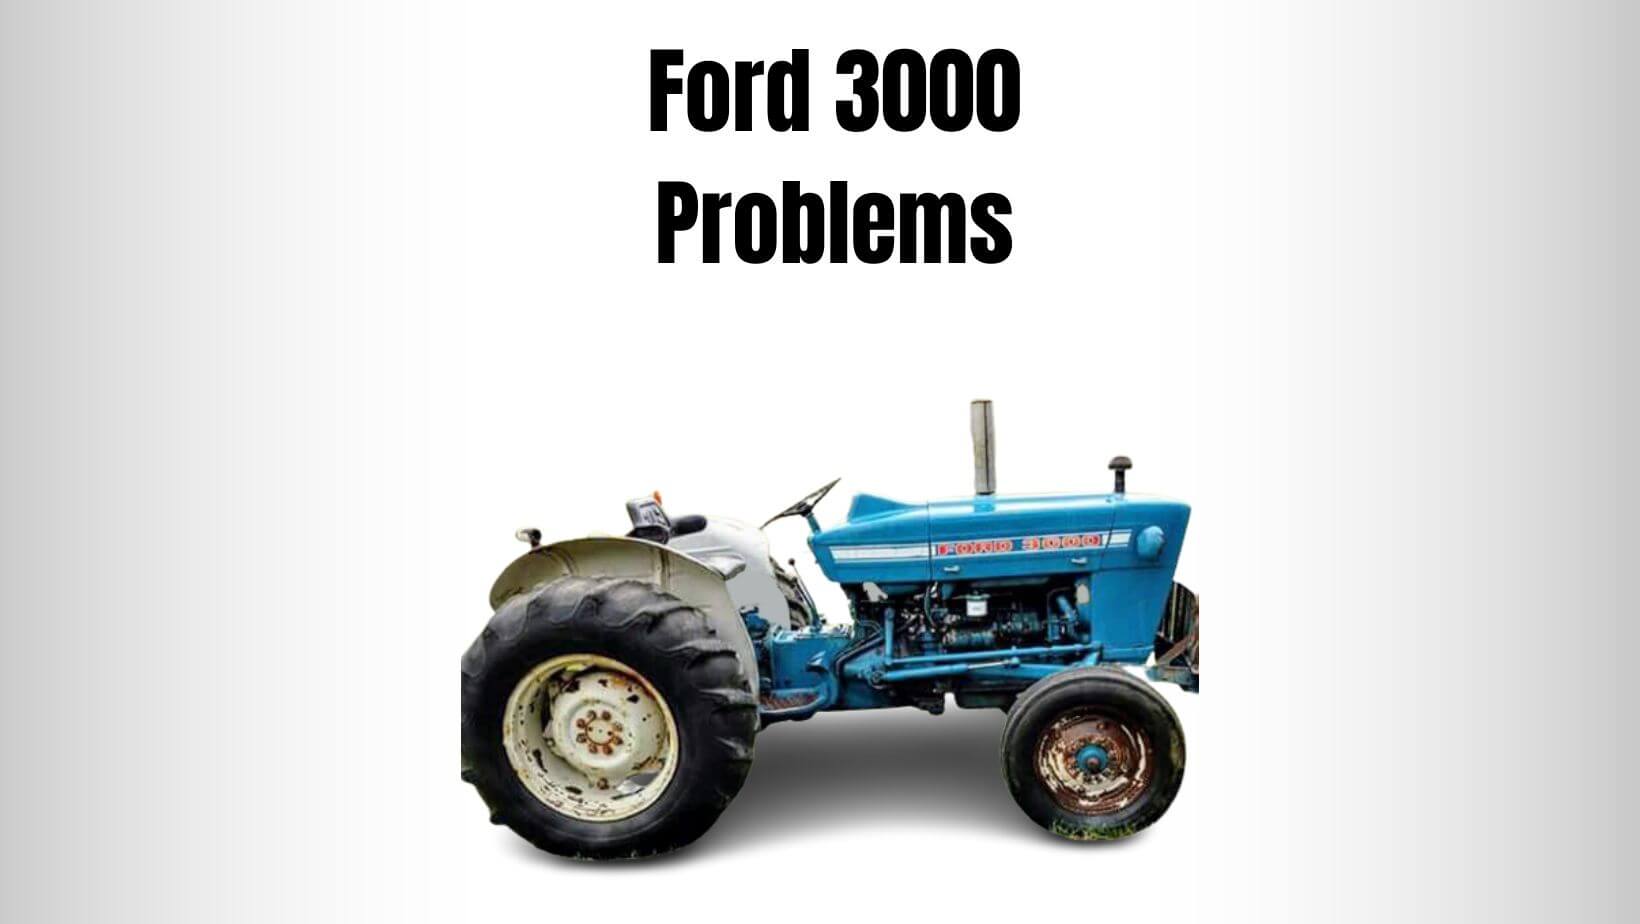 Ford 3000 Problems